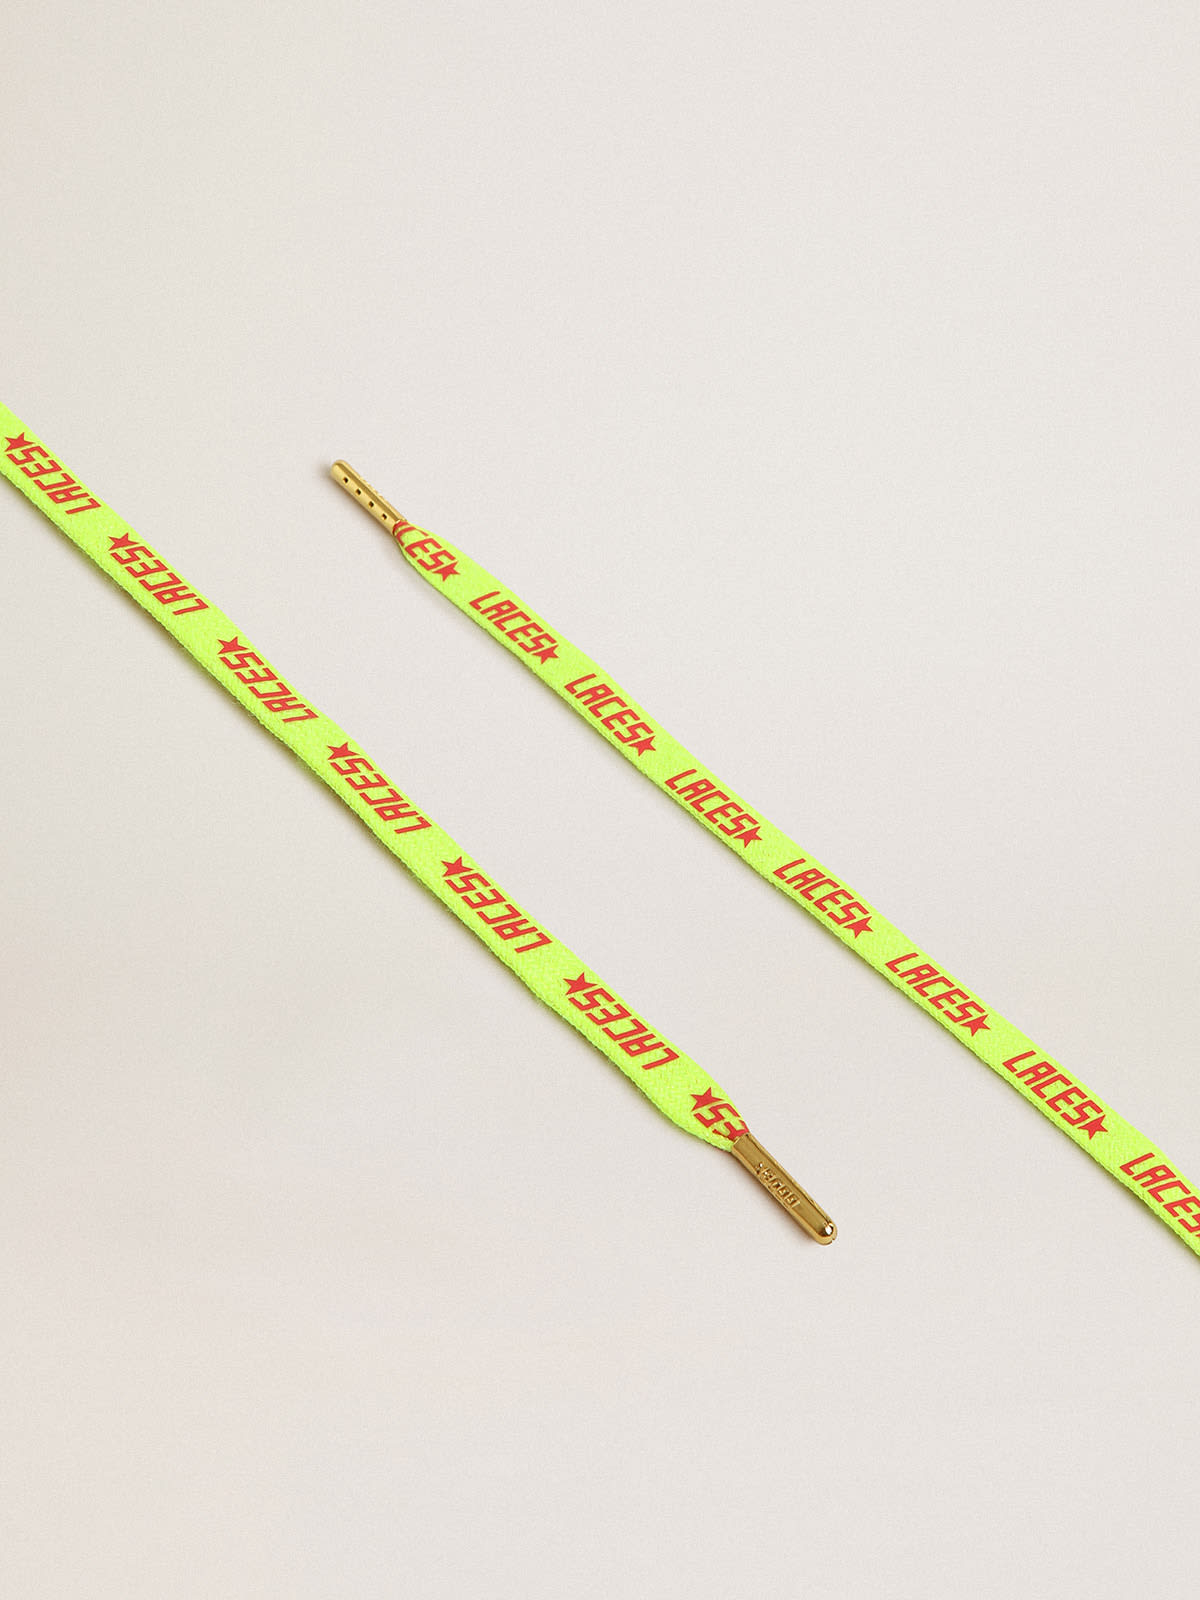 Golden Goose - Fluorescent yellow laces with contrasting orange ‘Laces’ lettering in 